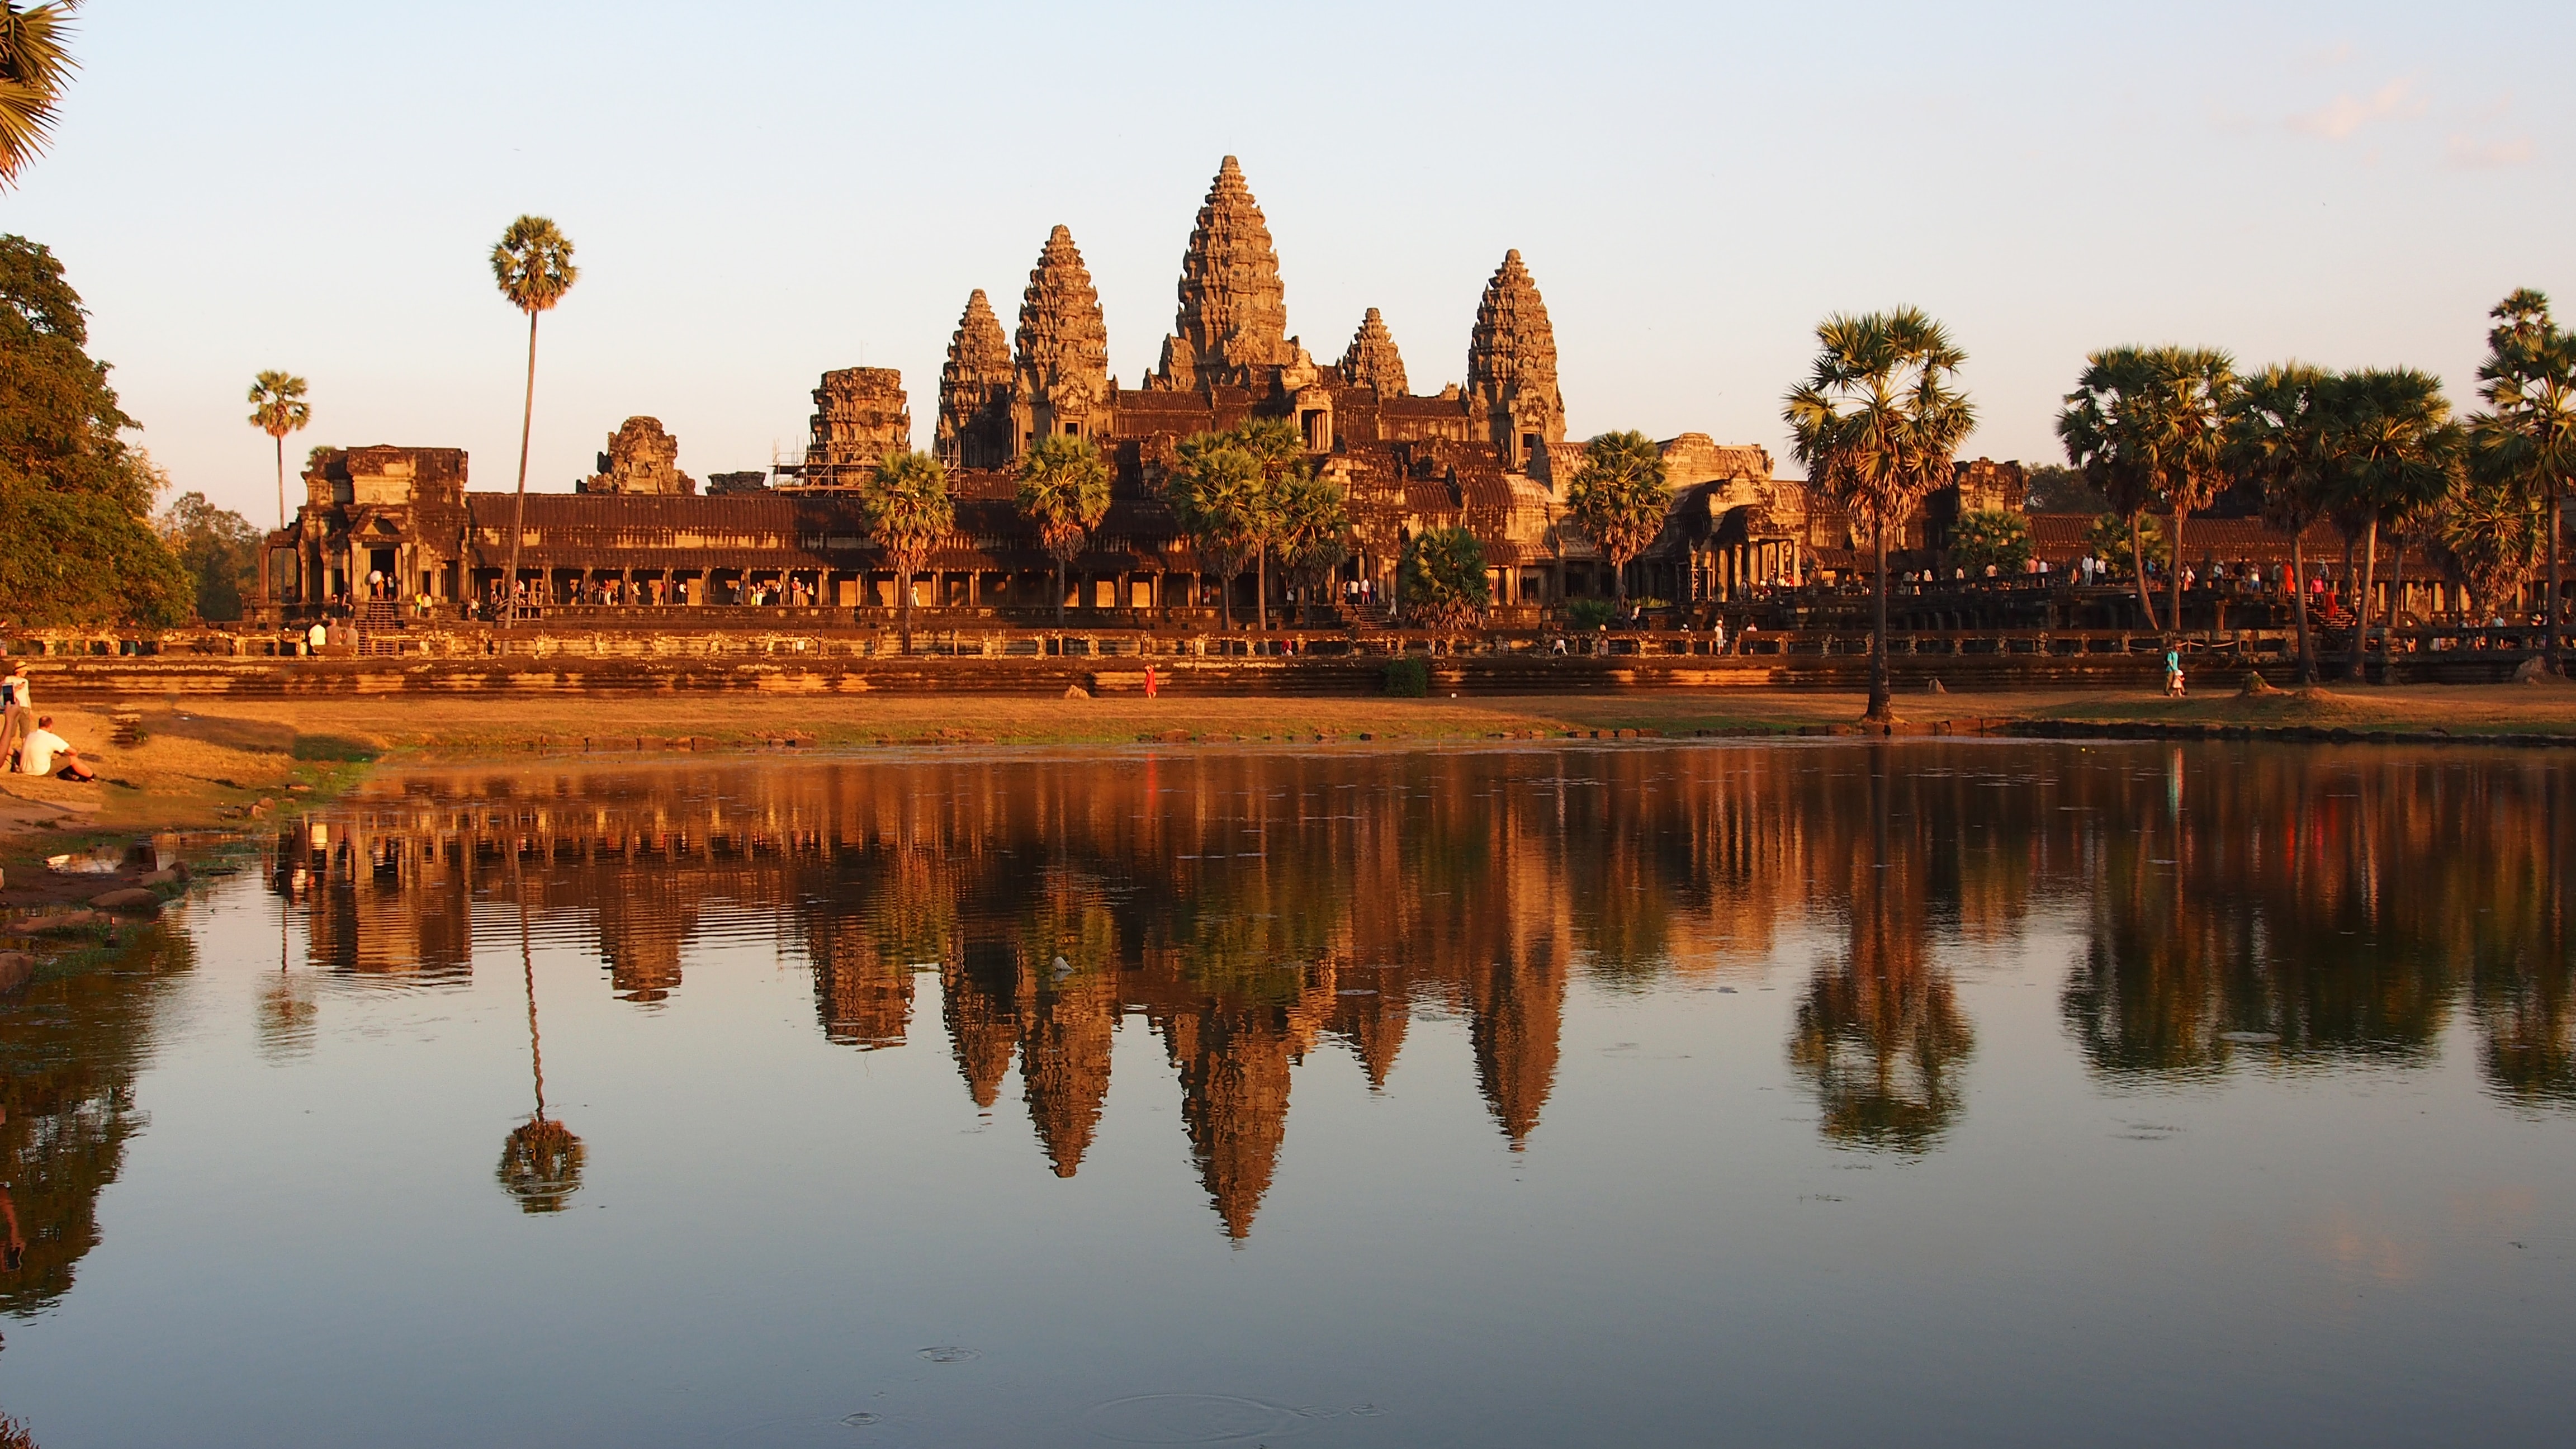 Cambodia to launch digital currency in Q3